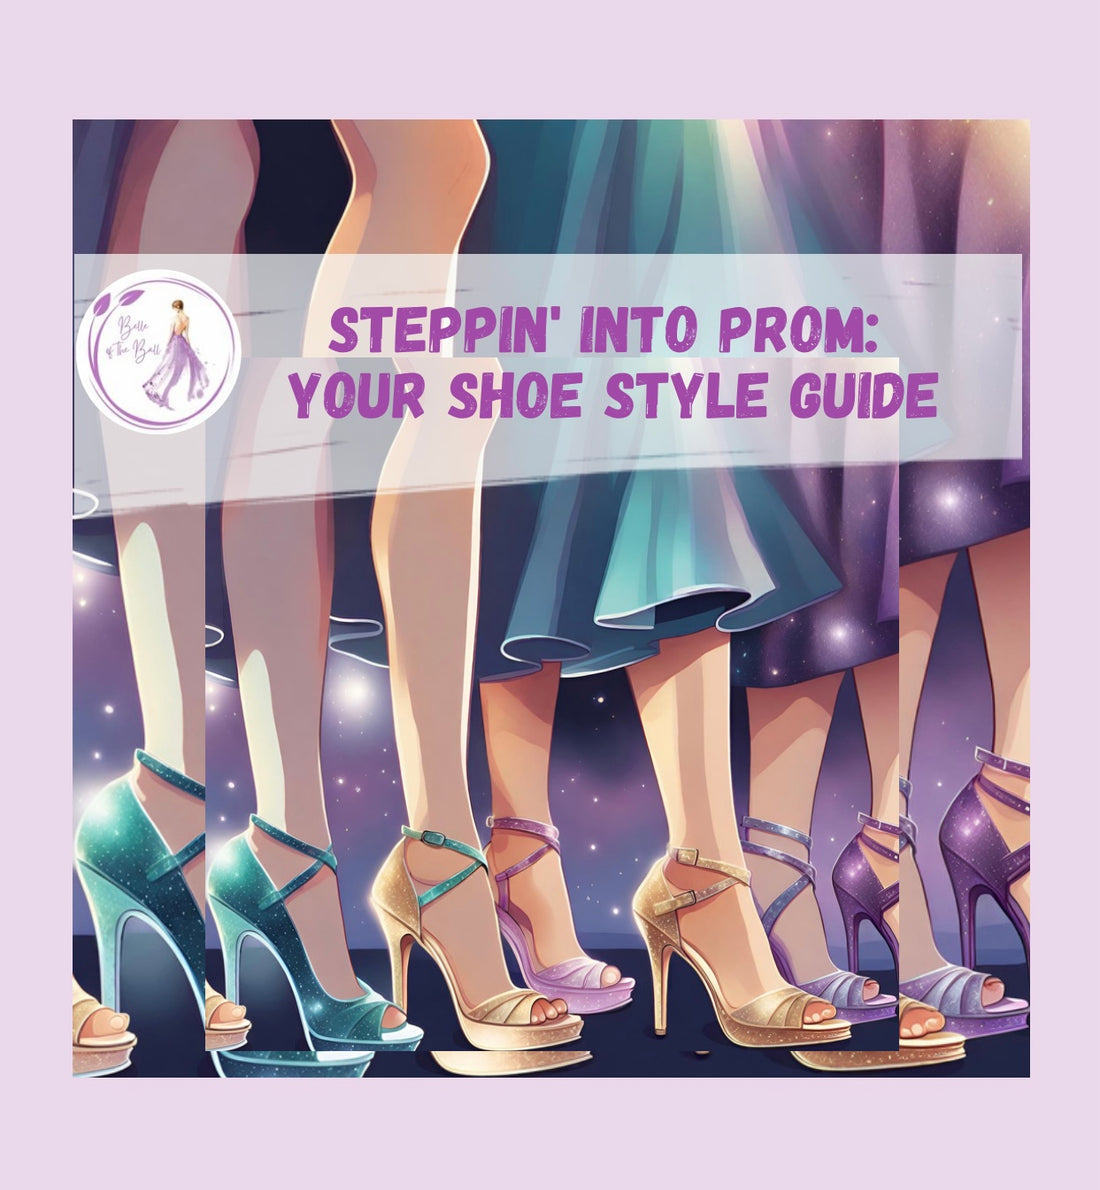 Steppin’ into Prom: Your School Ball Shoe Style Guide 👠